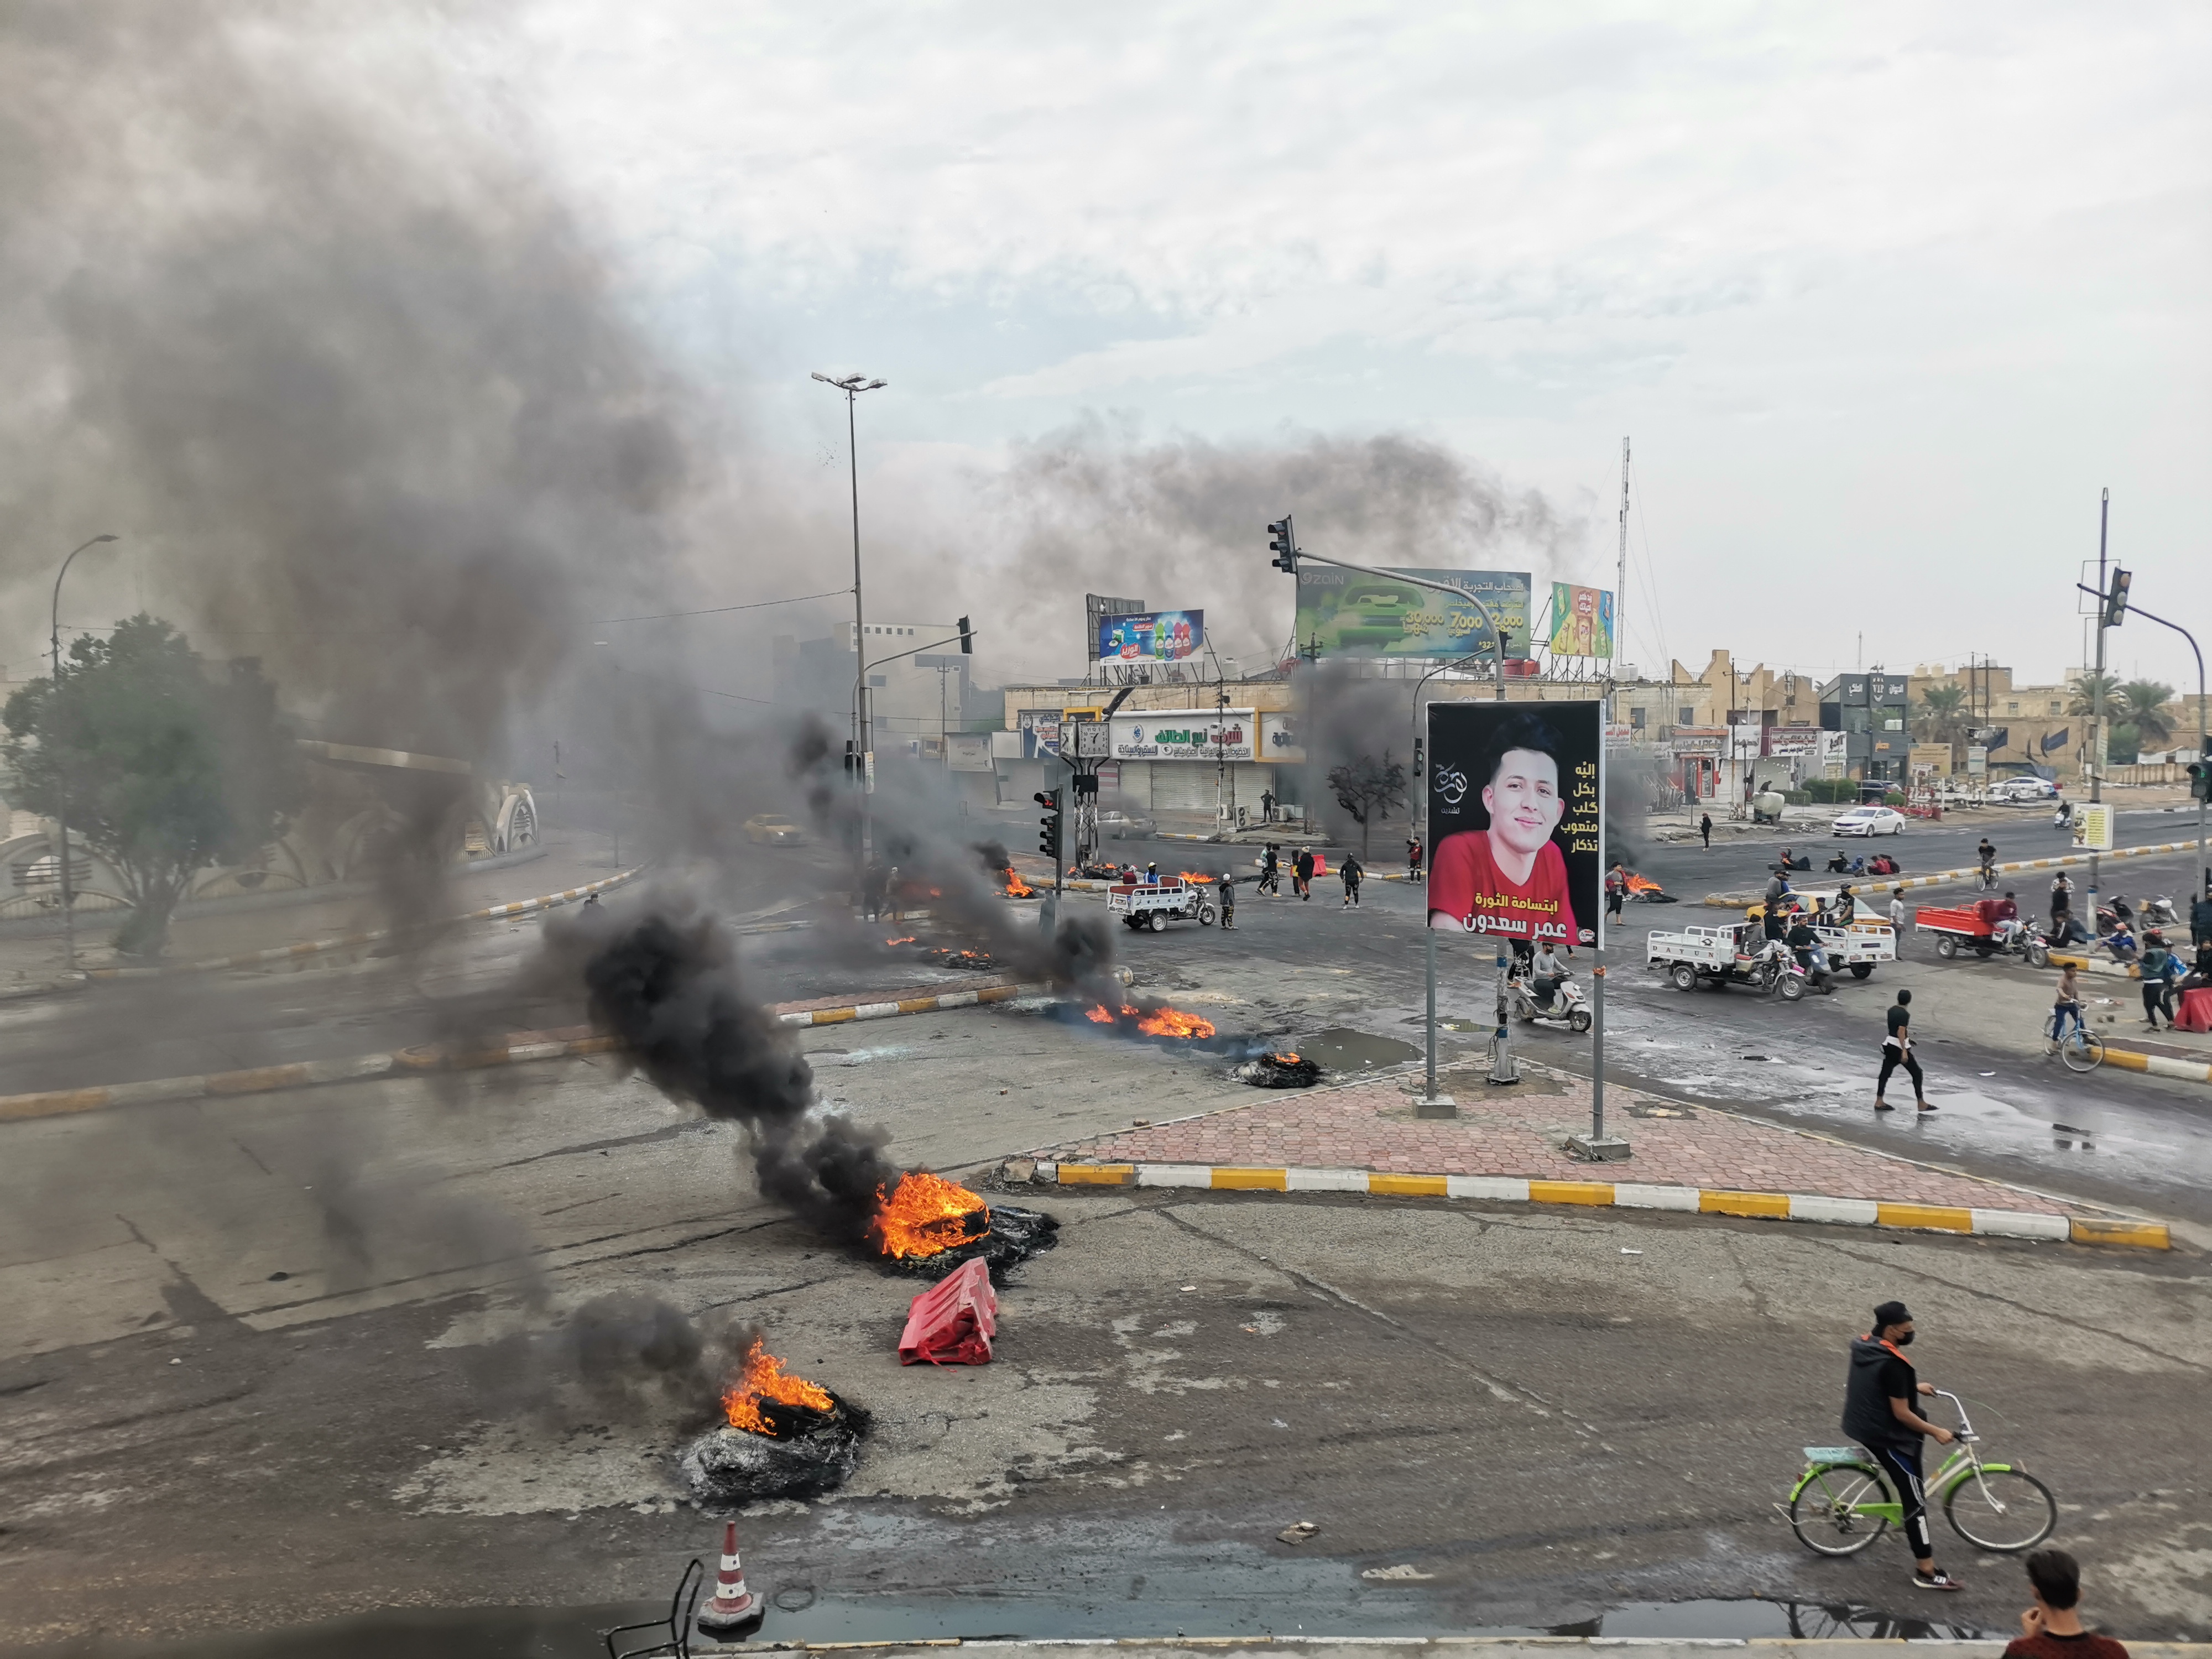 A view of the Haboubi square in Nasiriyah a day after torching protesters' tents by armed Sadr supporters, 28 November 2020 (MEE/Asaad Mohammed)